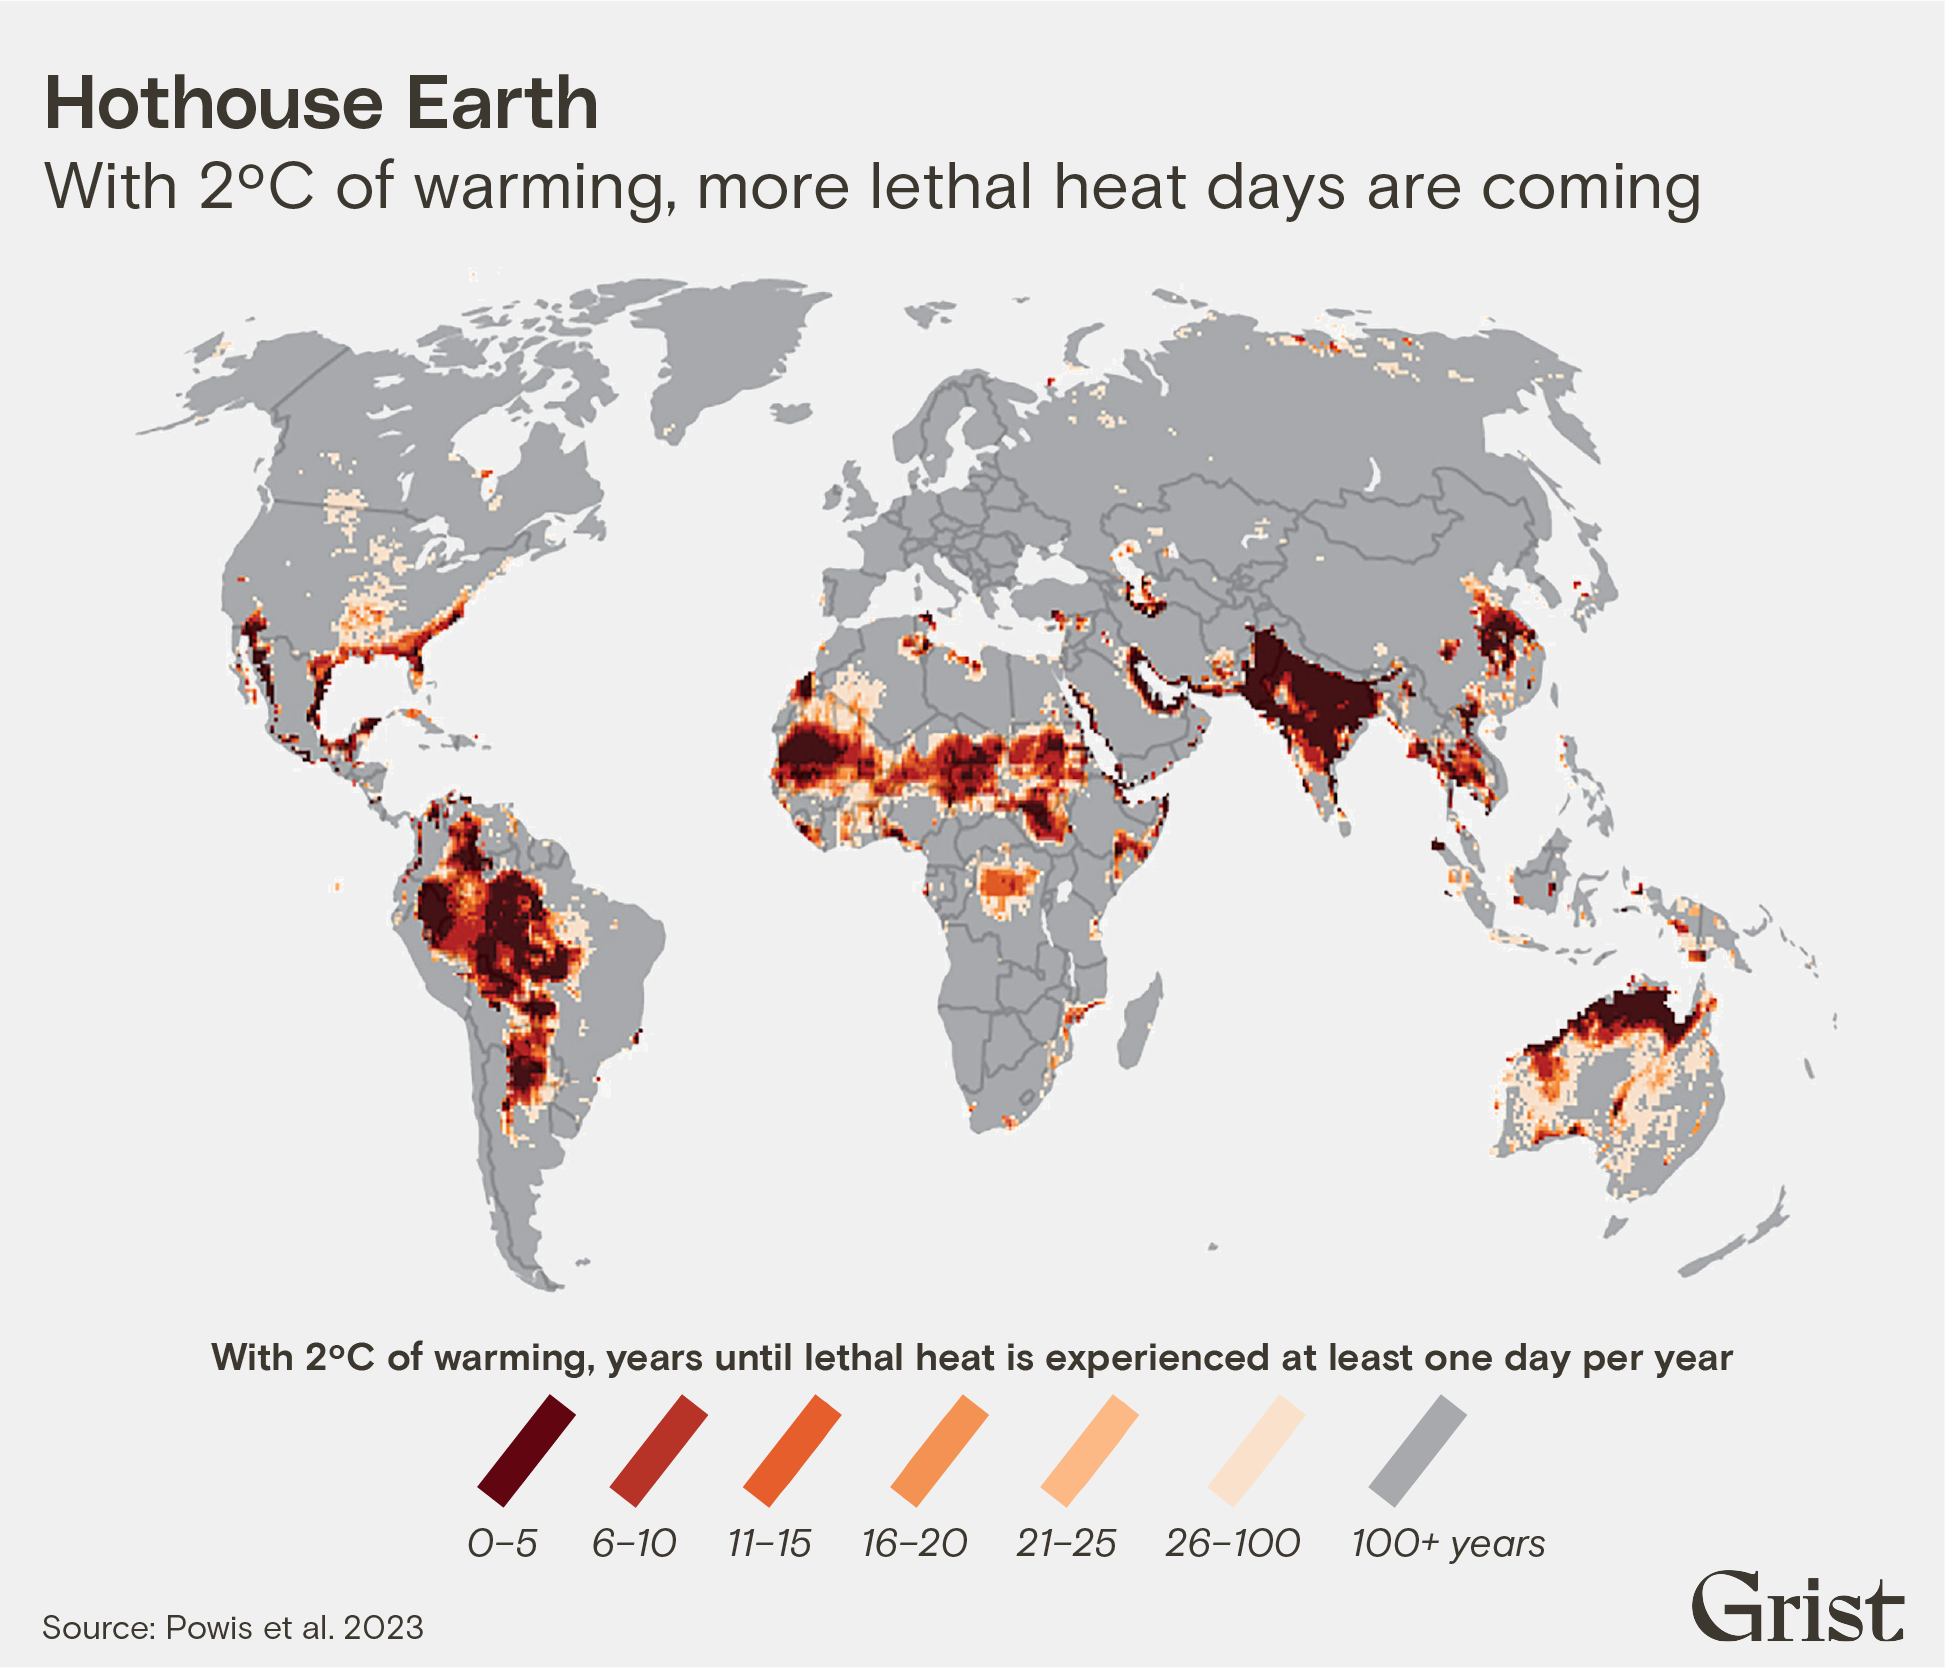 A global map showing the number of years until lethal heat is experienced at least one day per year once the world has warmed 2ºC on average. Areas at high risk include the equatorial region, much of South America, and northern Australia.